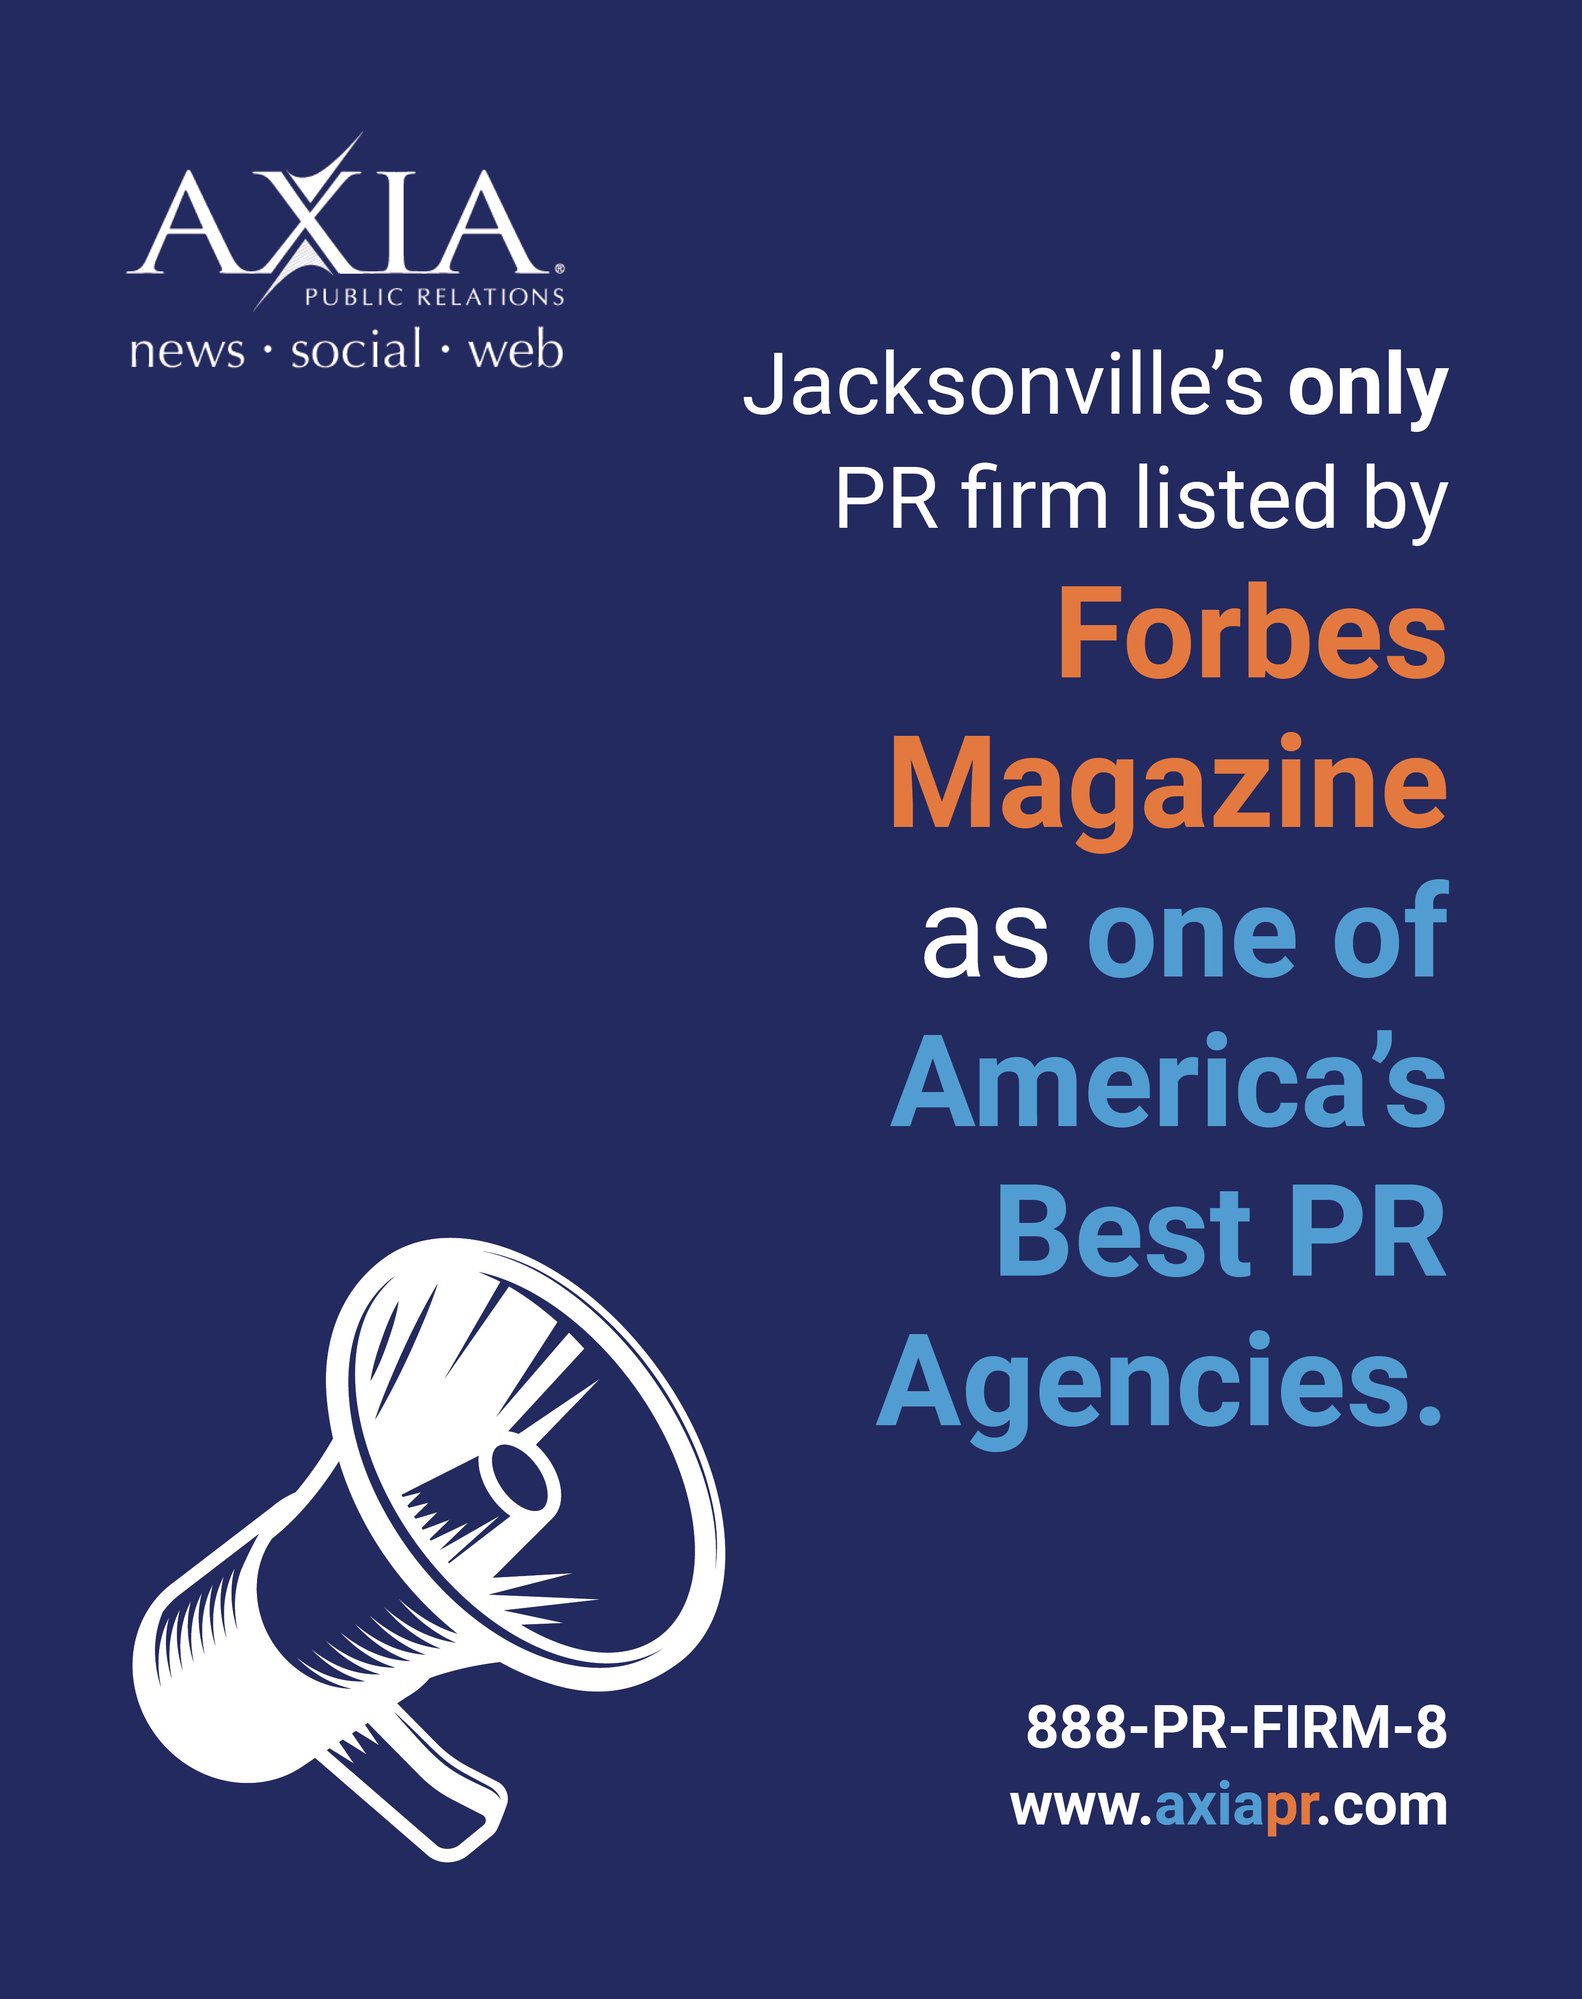 Graphic explaining that Axia is the only PR firm in Jacksonville that on Forbes Magazine's "America's Best PR Agencies" list.